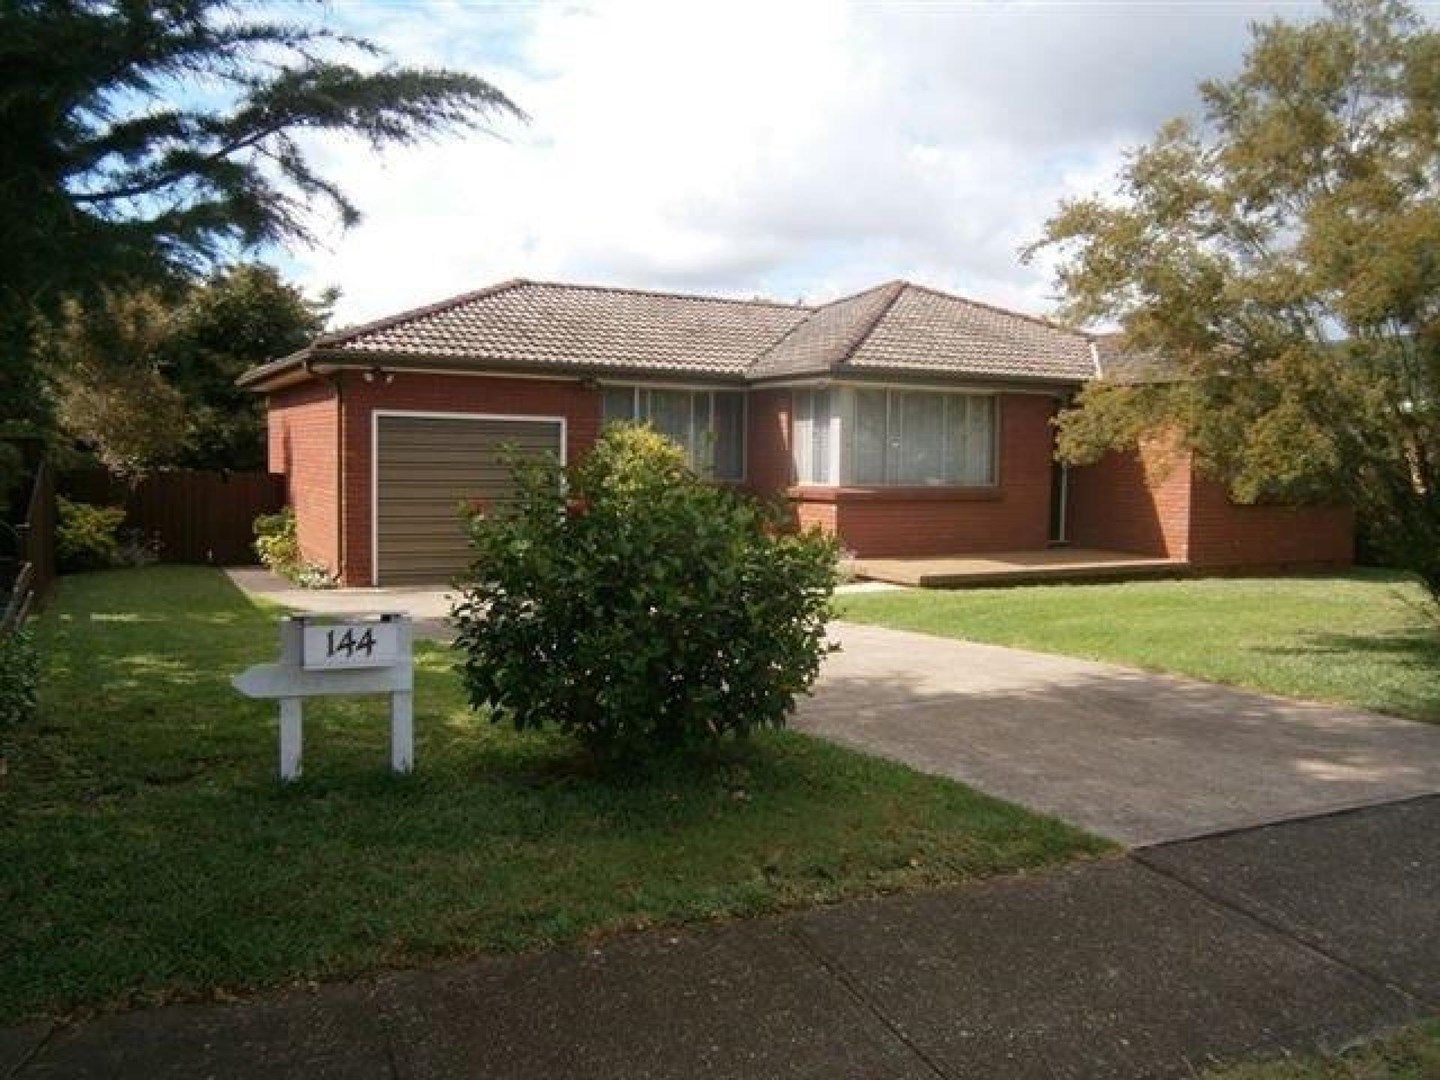 3 bedrooms House in 144 Waminda Avenue CAMPBELLTOWN NSW, 2560